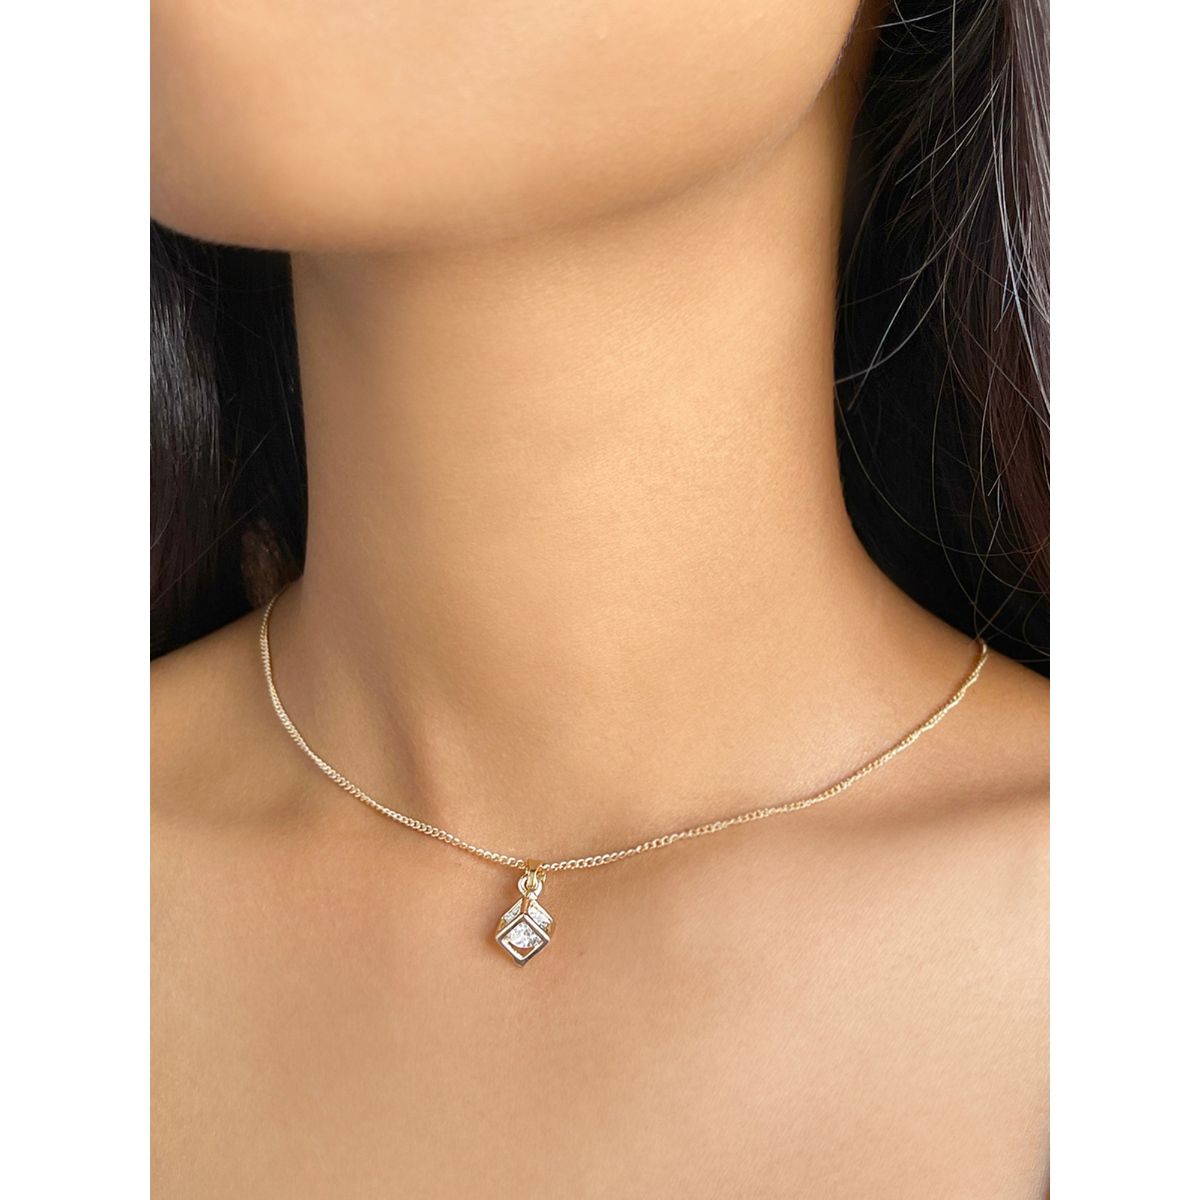 Sparkling Silver Crystal Collar Chain Choker Necklace Bridal Women Wedding  Party Diamante Rhinestone Choker Jewelry Gifts CL3019 From Allloves, $2.93  | DHgate.Com